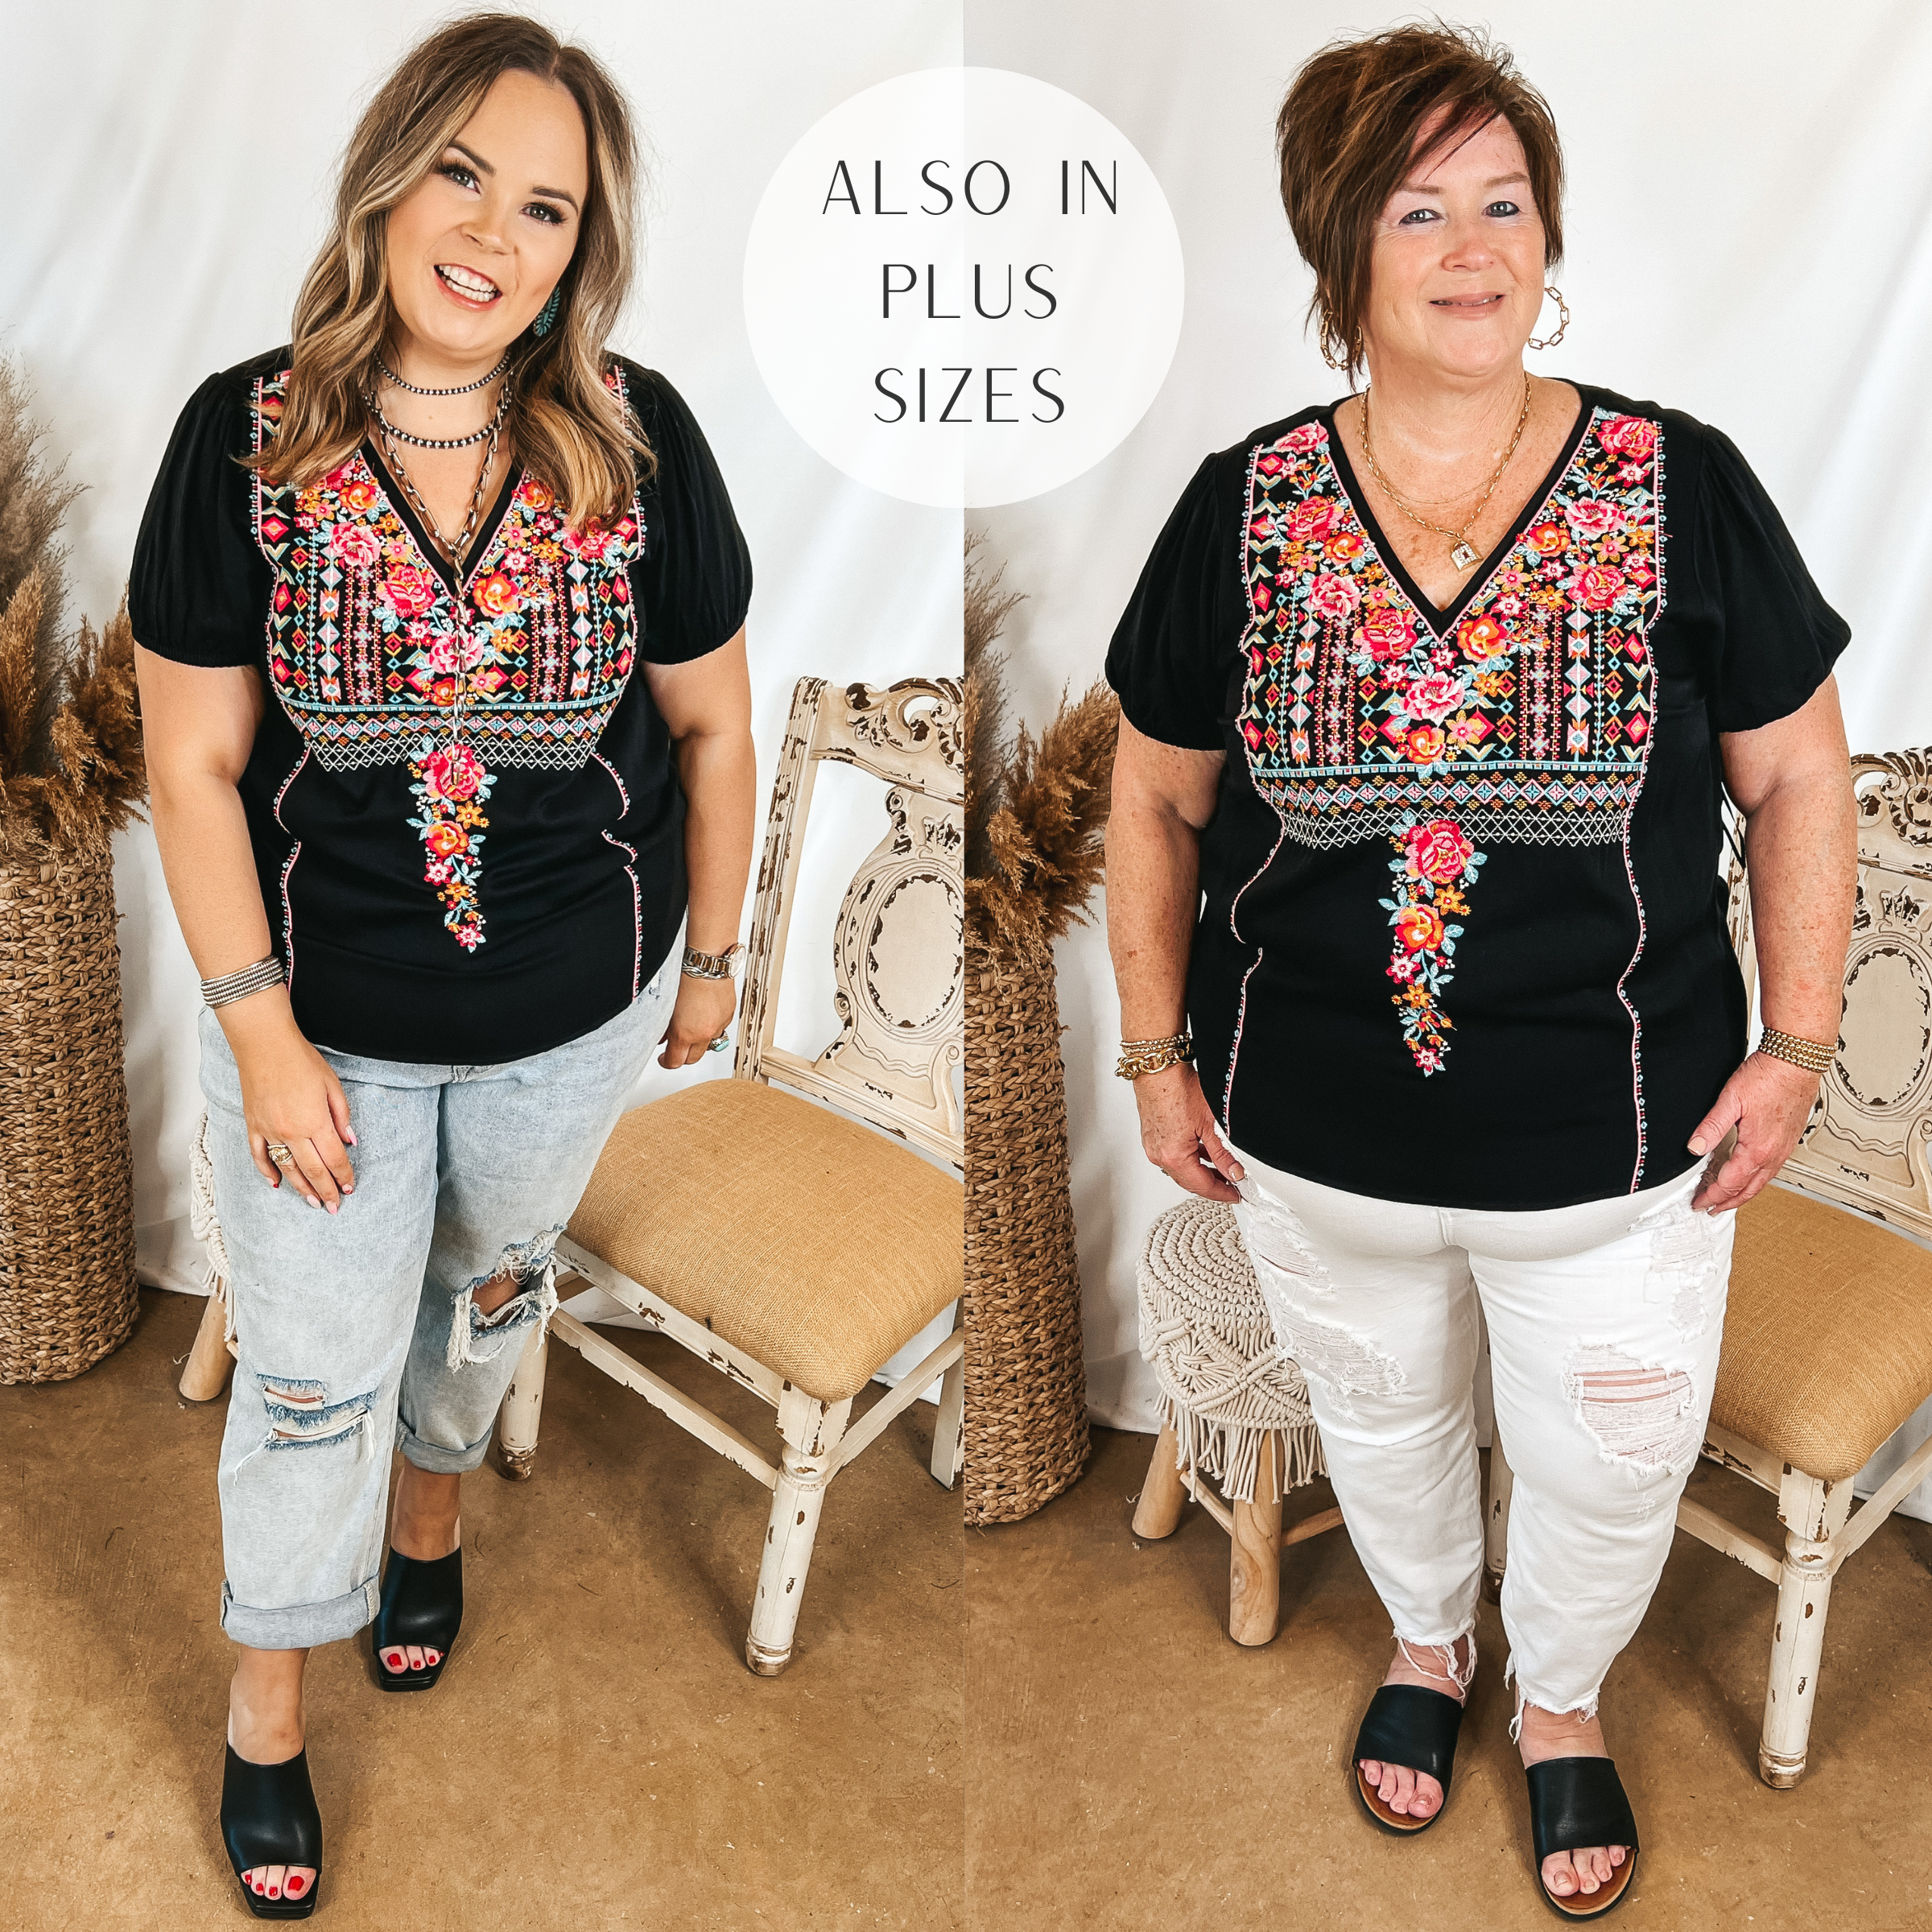 Models are wearing a back v neck top that has colorful embroidery on the front. Size large model has it paired with light wash jeans, black heels, and silver jewelry. Plus size model has it paired with white jeans, black sandals, and gold jewelry.